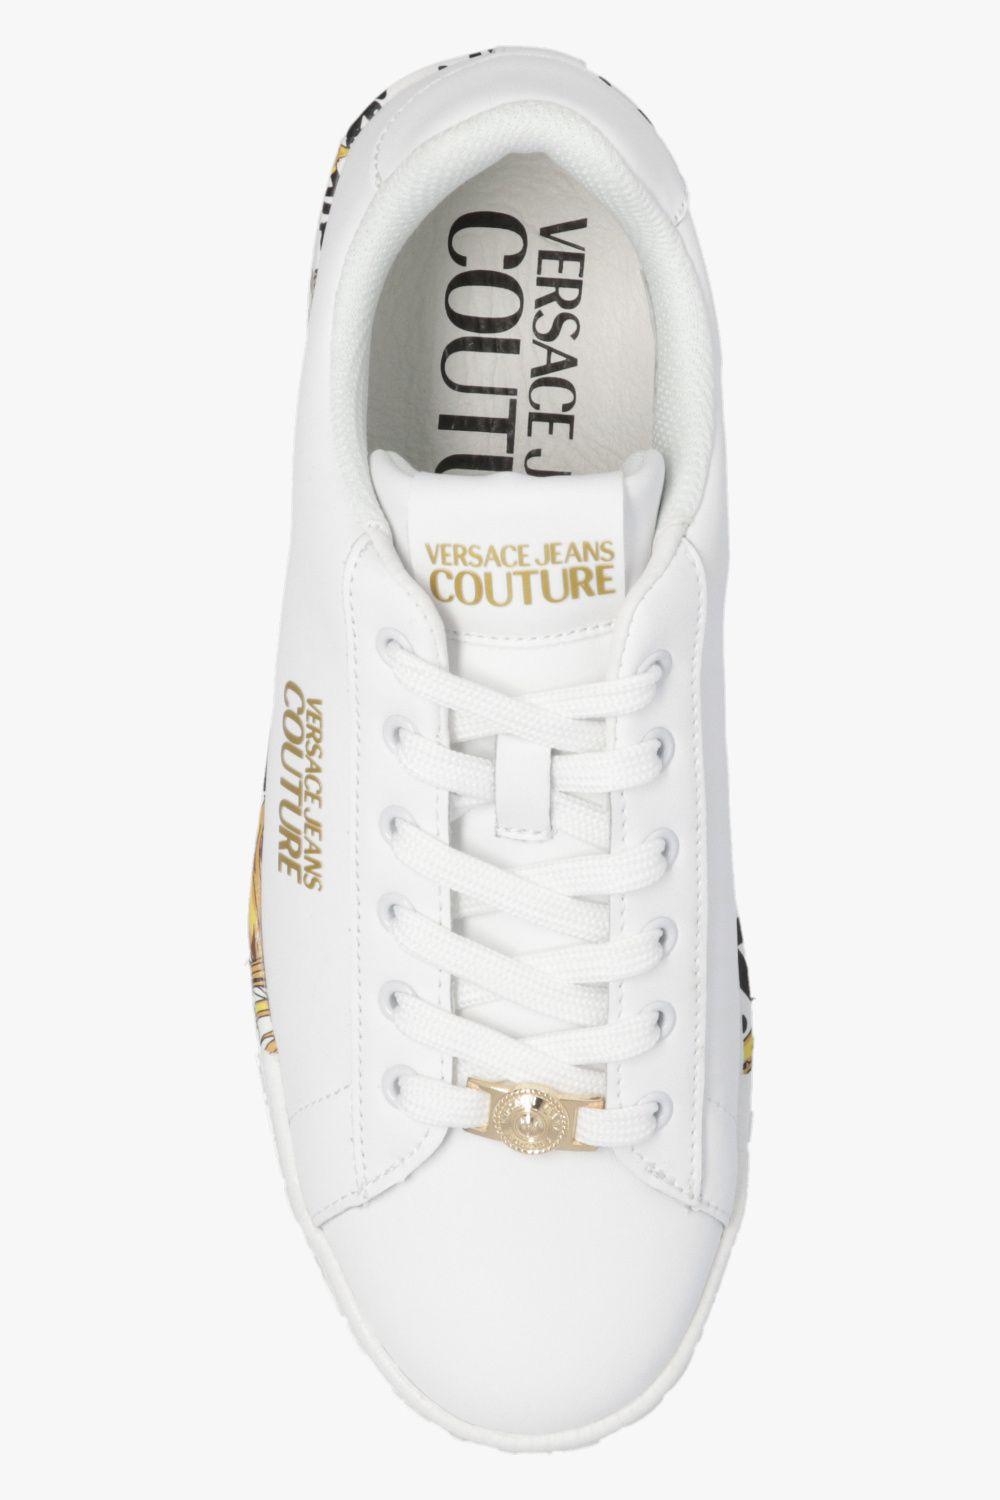 Versace Jeans Couture 'court 88' Sneakers in White | Lyst